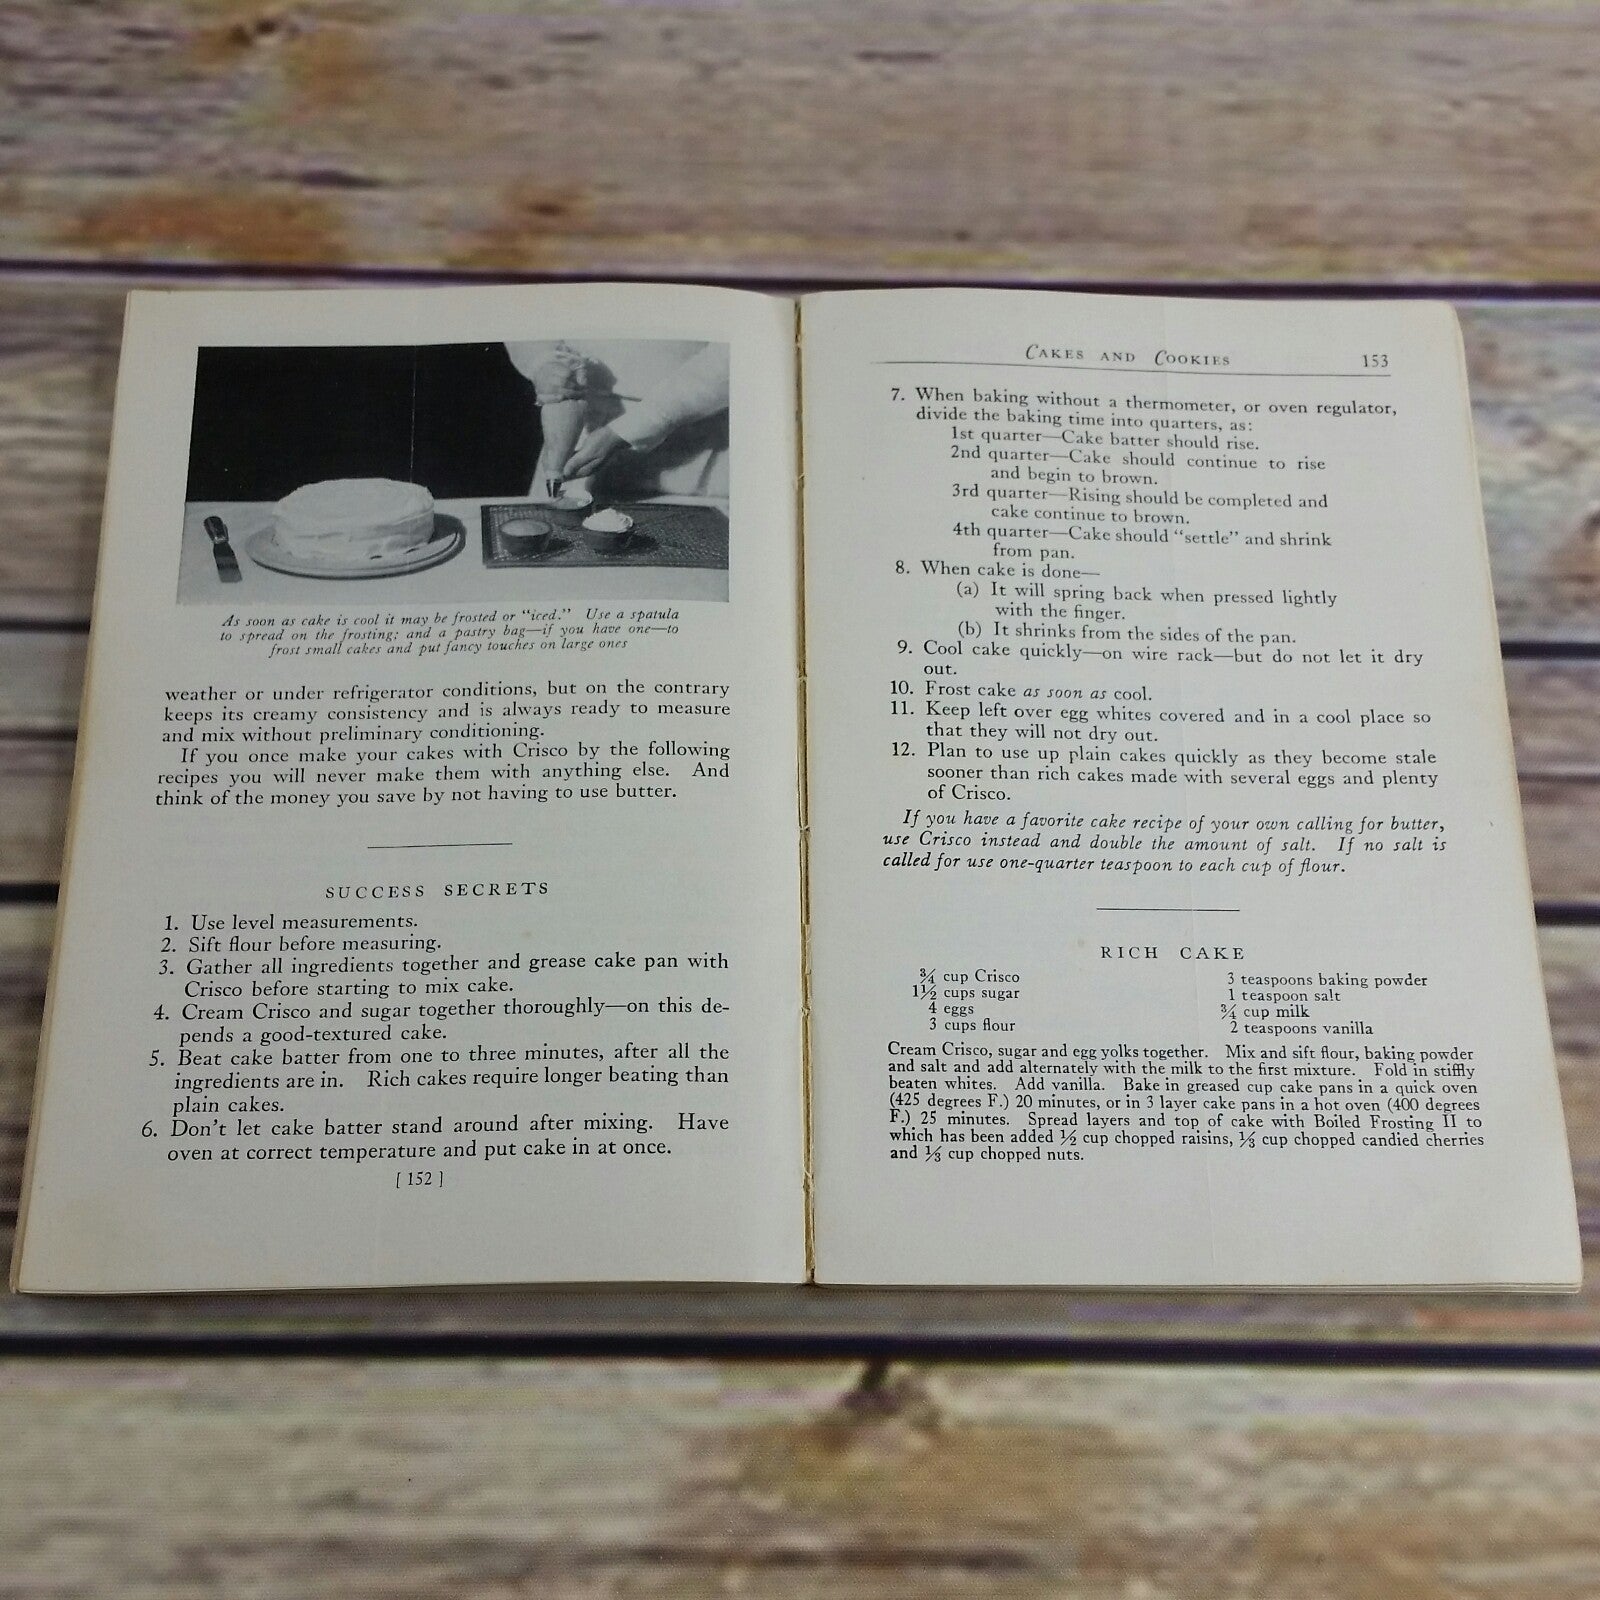 Vintage Cookbook The Art of Cooking and Serving Crisco Recipes 1934 Paperback Cook Book - At Grandma's Table